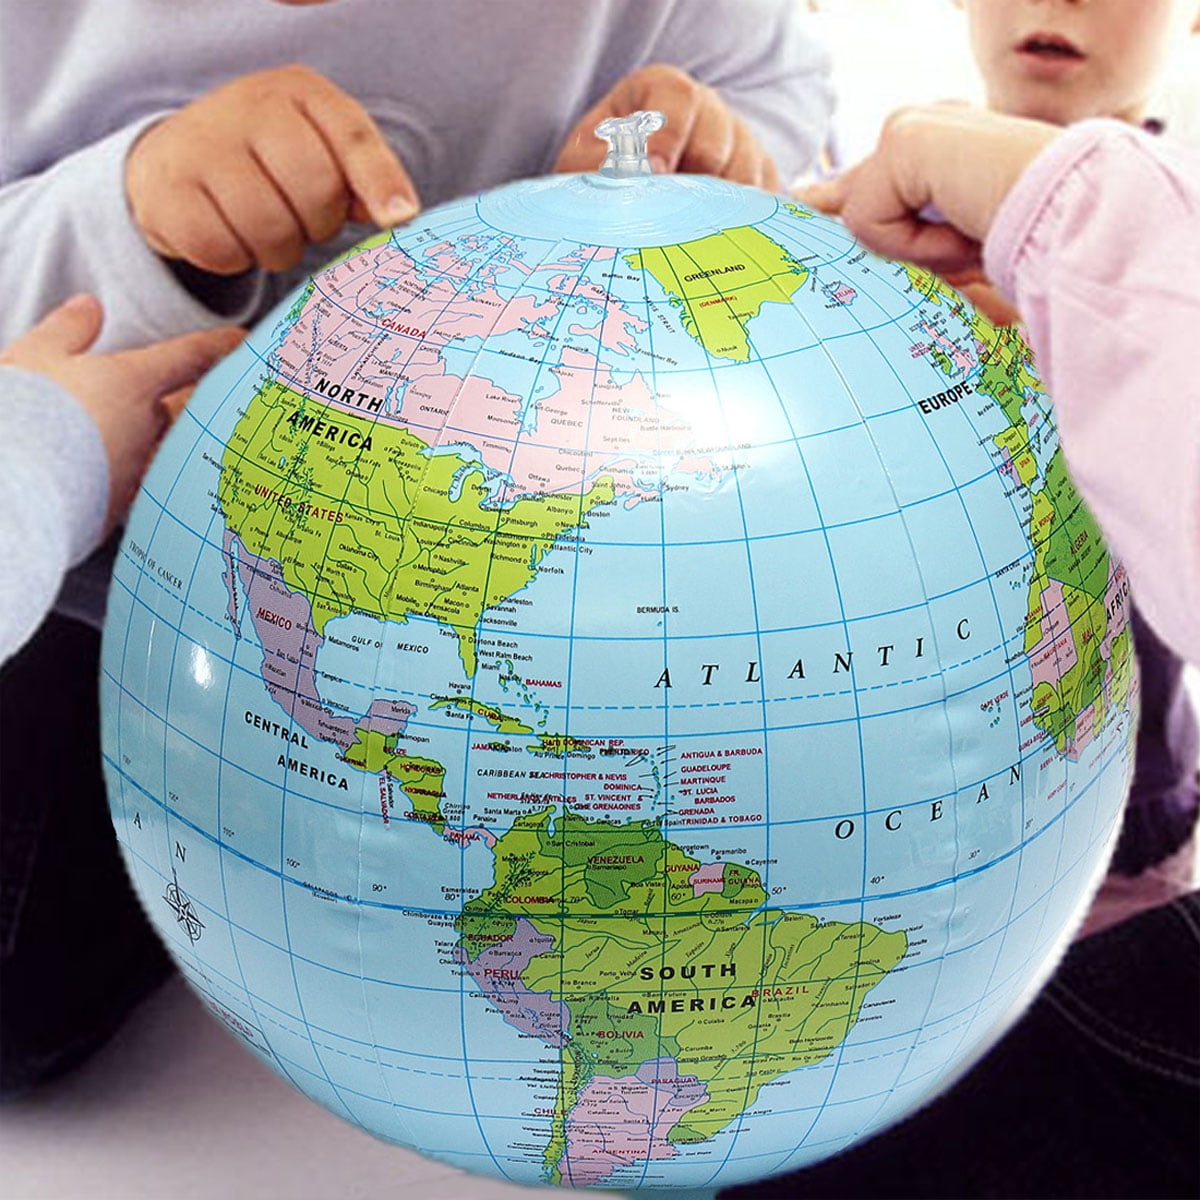 Potato001 Inflatable World Globe Earth Map Geography Teacher Aid Ball Toy Gift 40cm/16